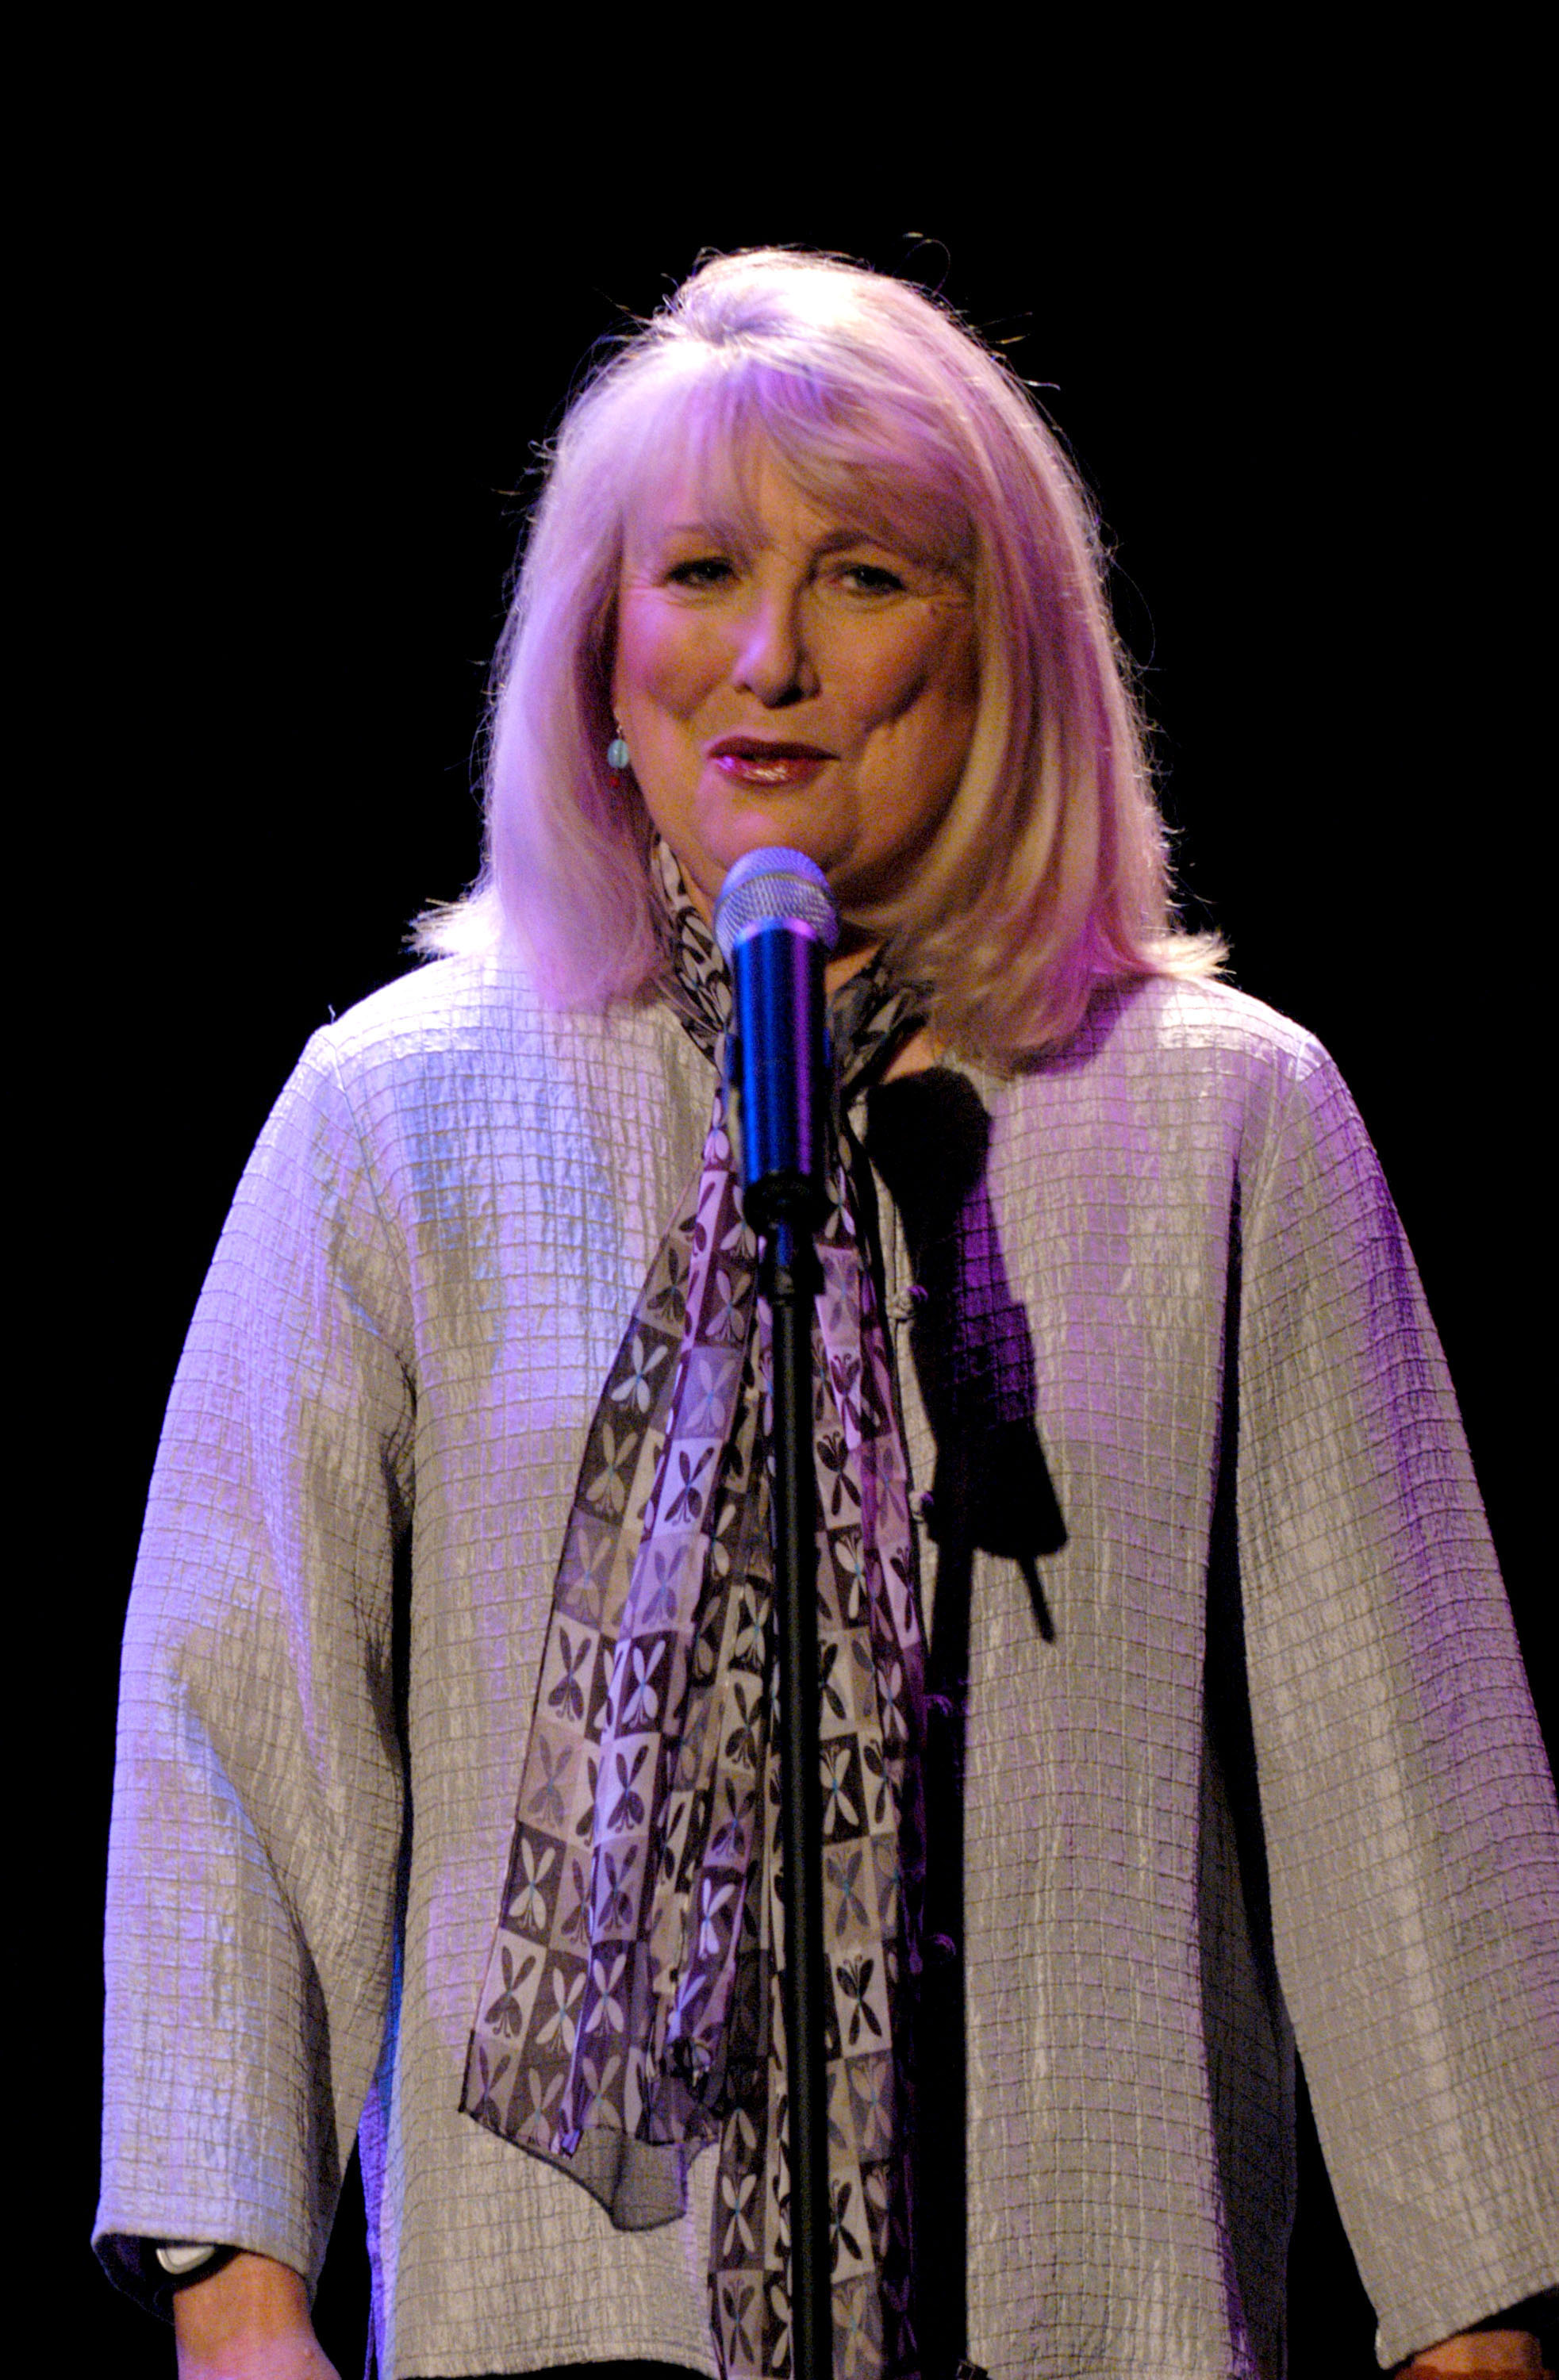 Teri Garr during The 10th Annual U.S. Comedy Arts Festival - The Moth. No Way Back: Stories from the Frontlines at St. Regis Hotel in Aspen, Colorado on March 4, 2004. | Source: Getty Images